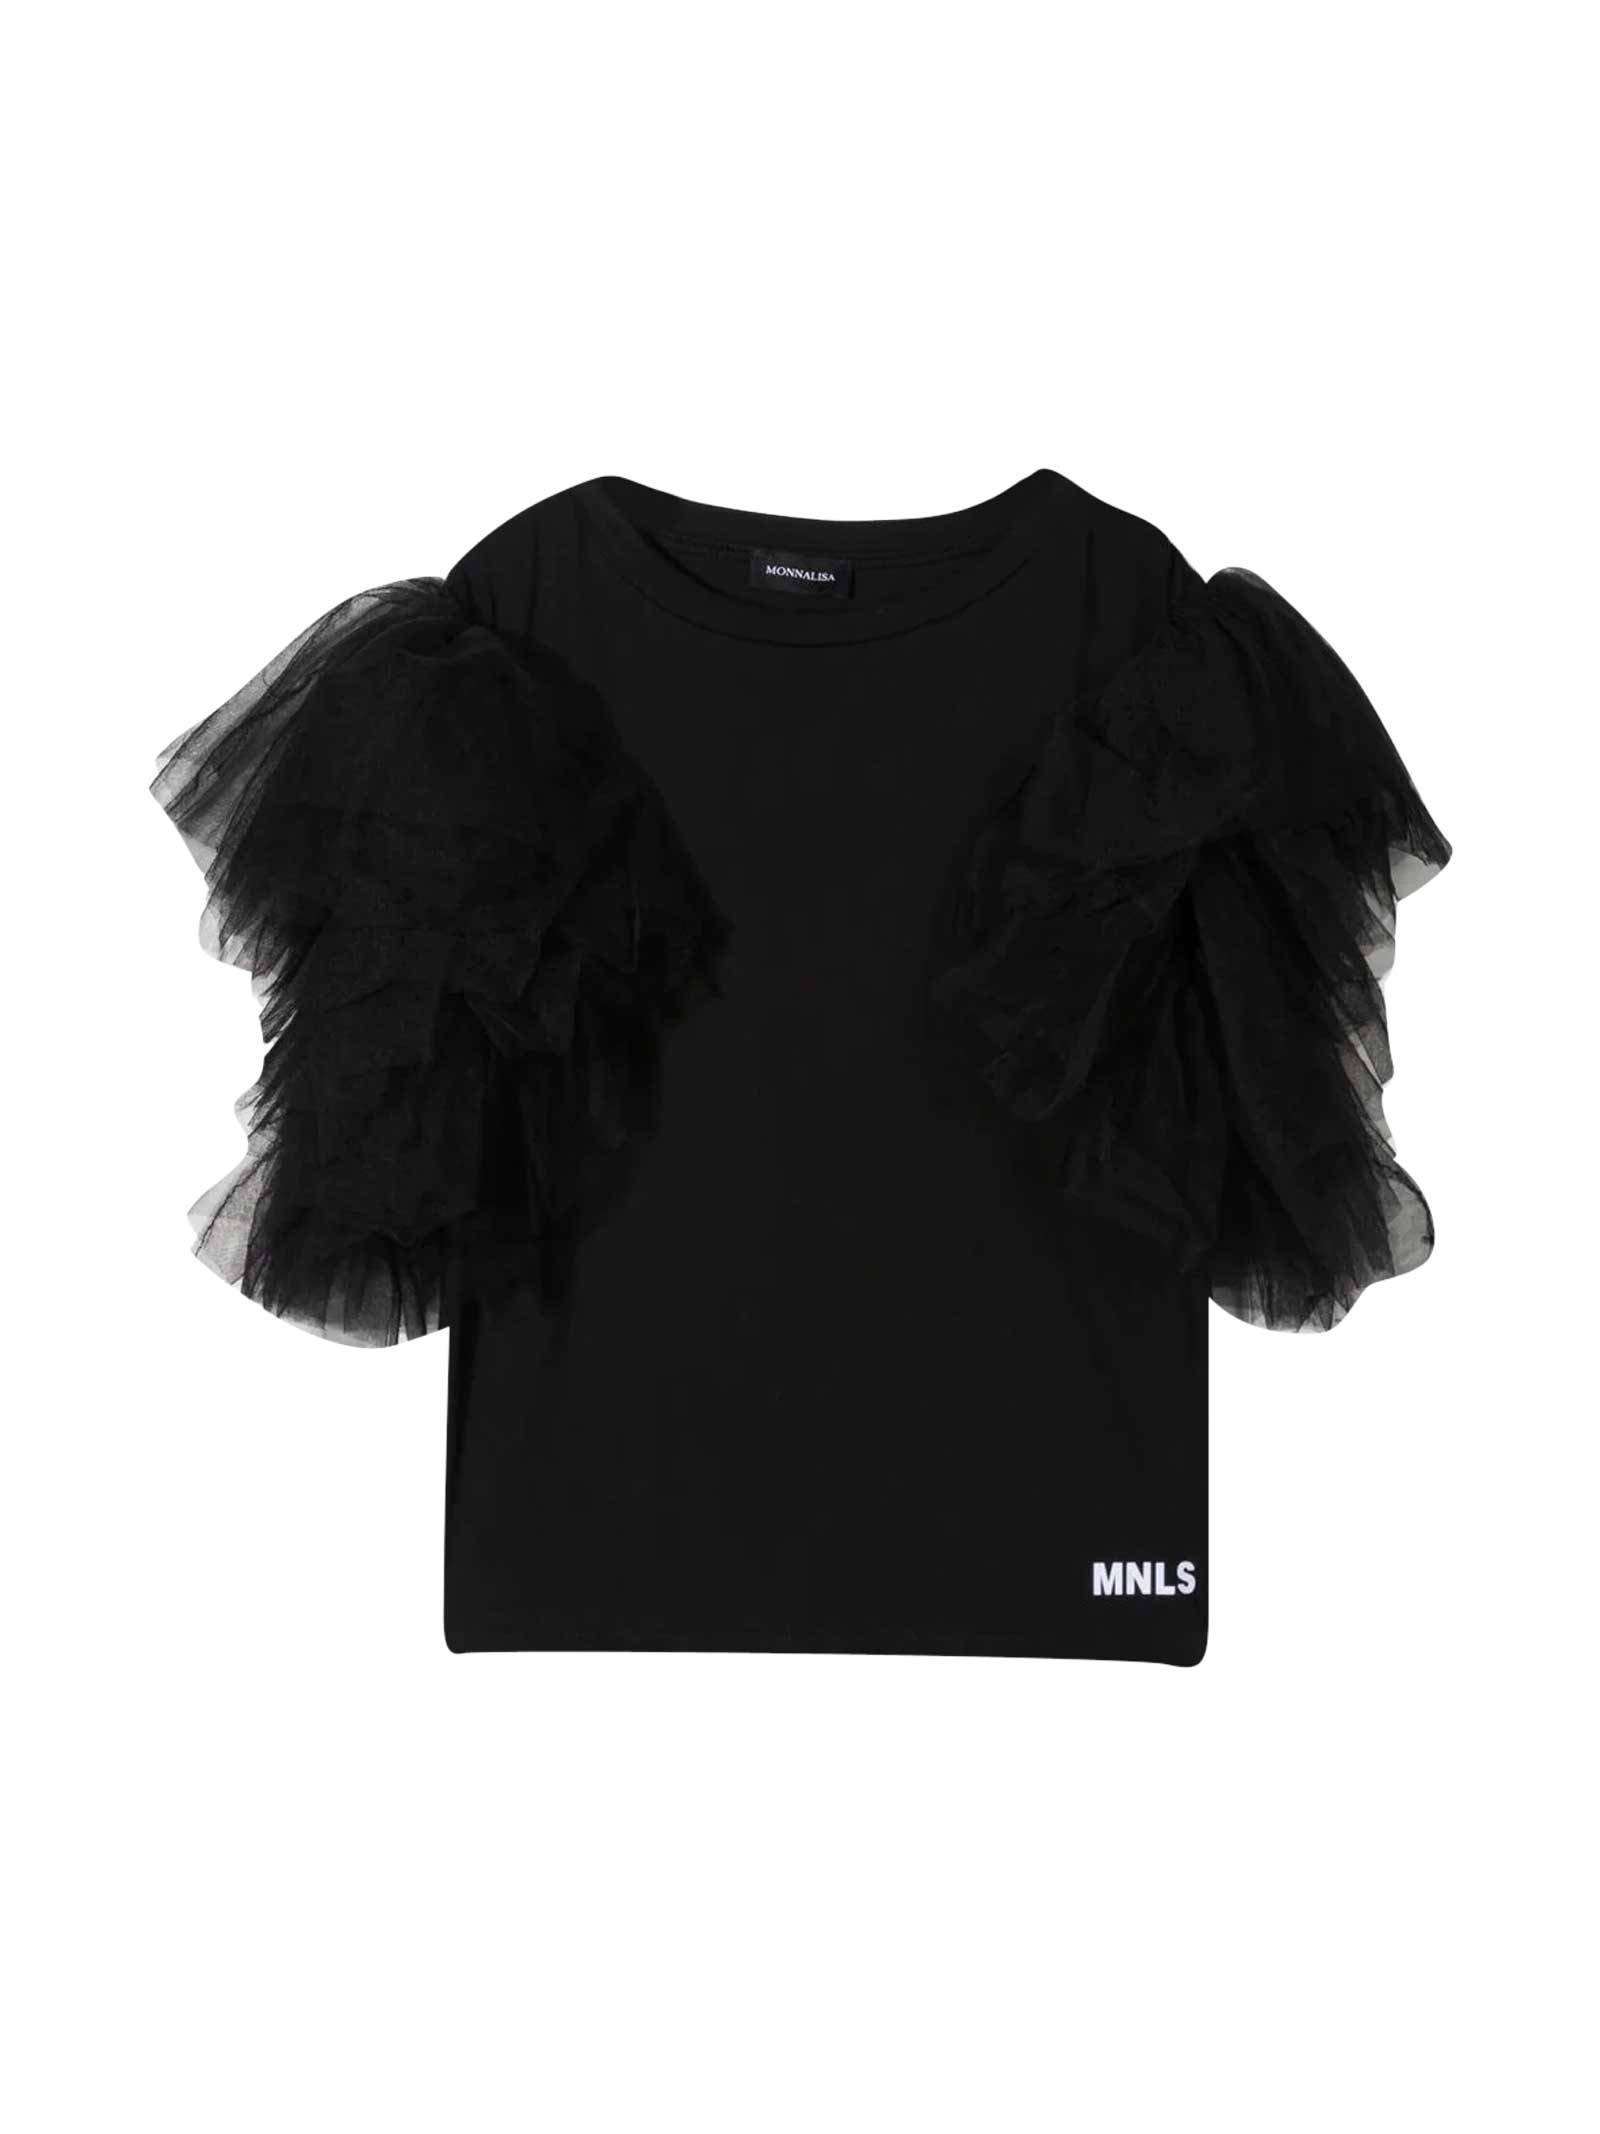 Monnalisa Black T-shirt With Tulle